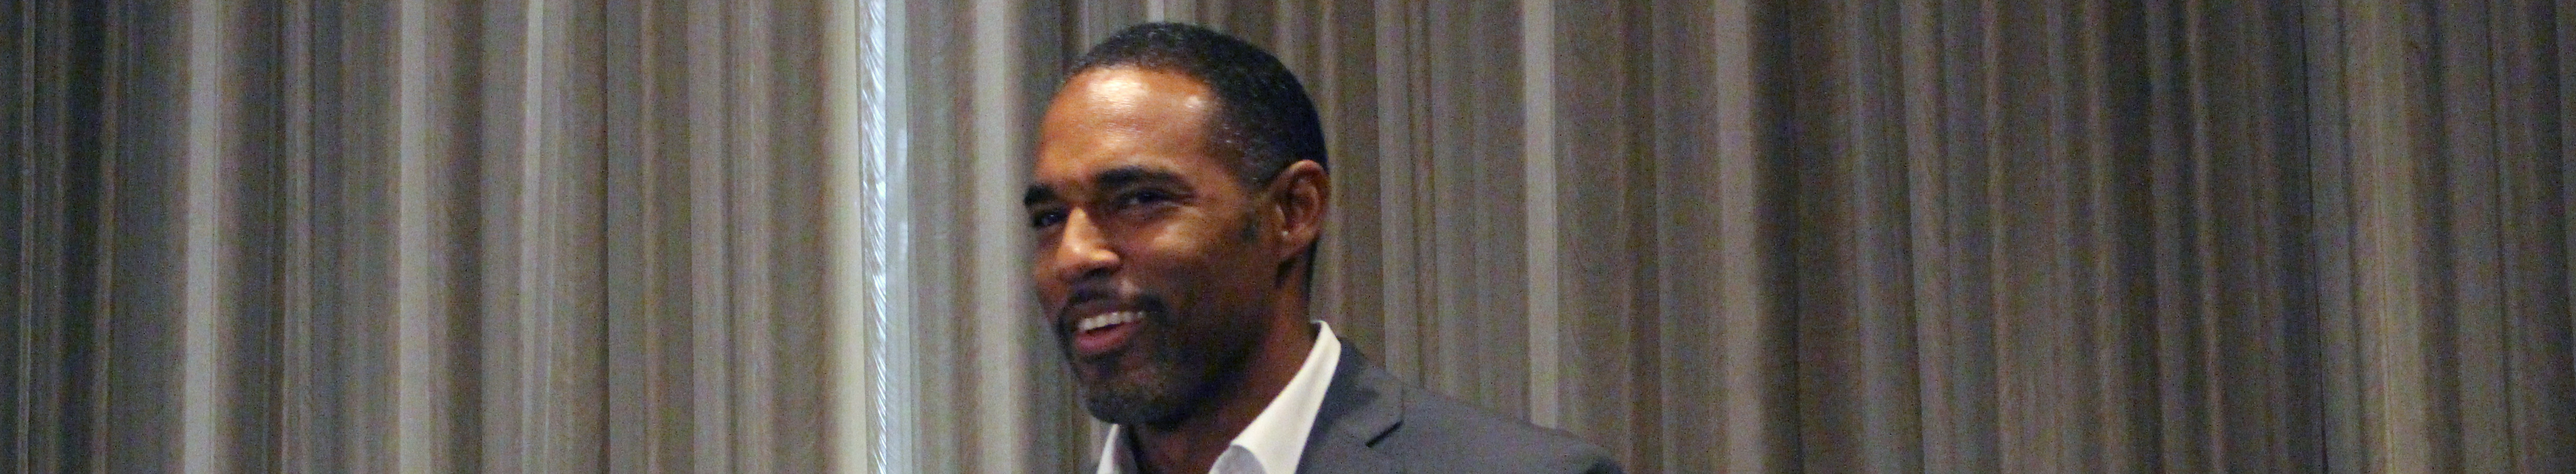 Jason George standing at a podium with the sign Media Access Awards